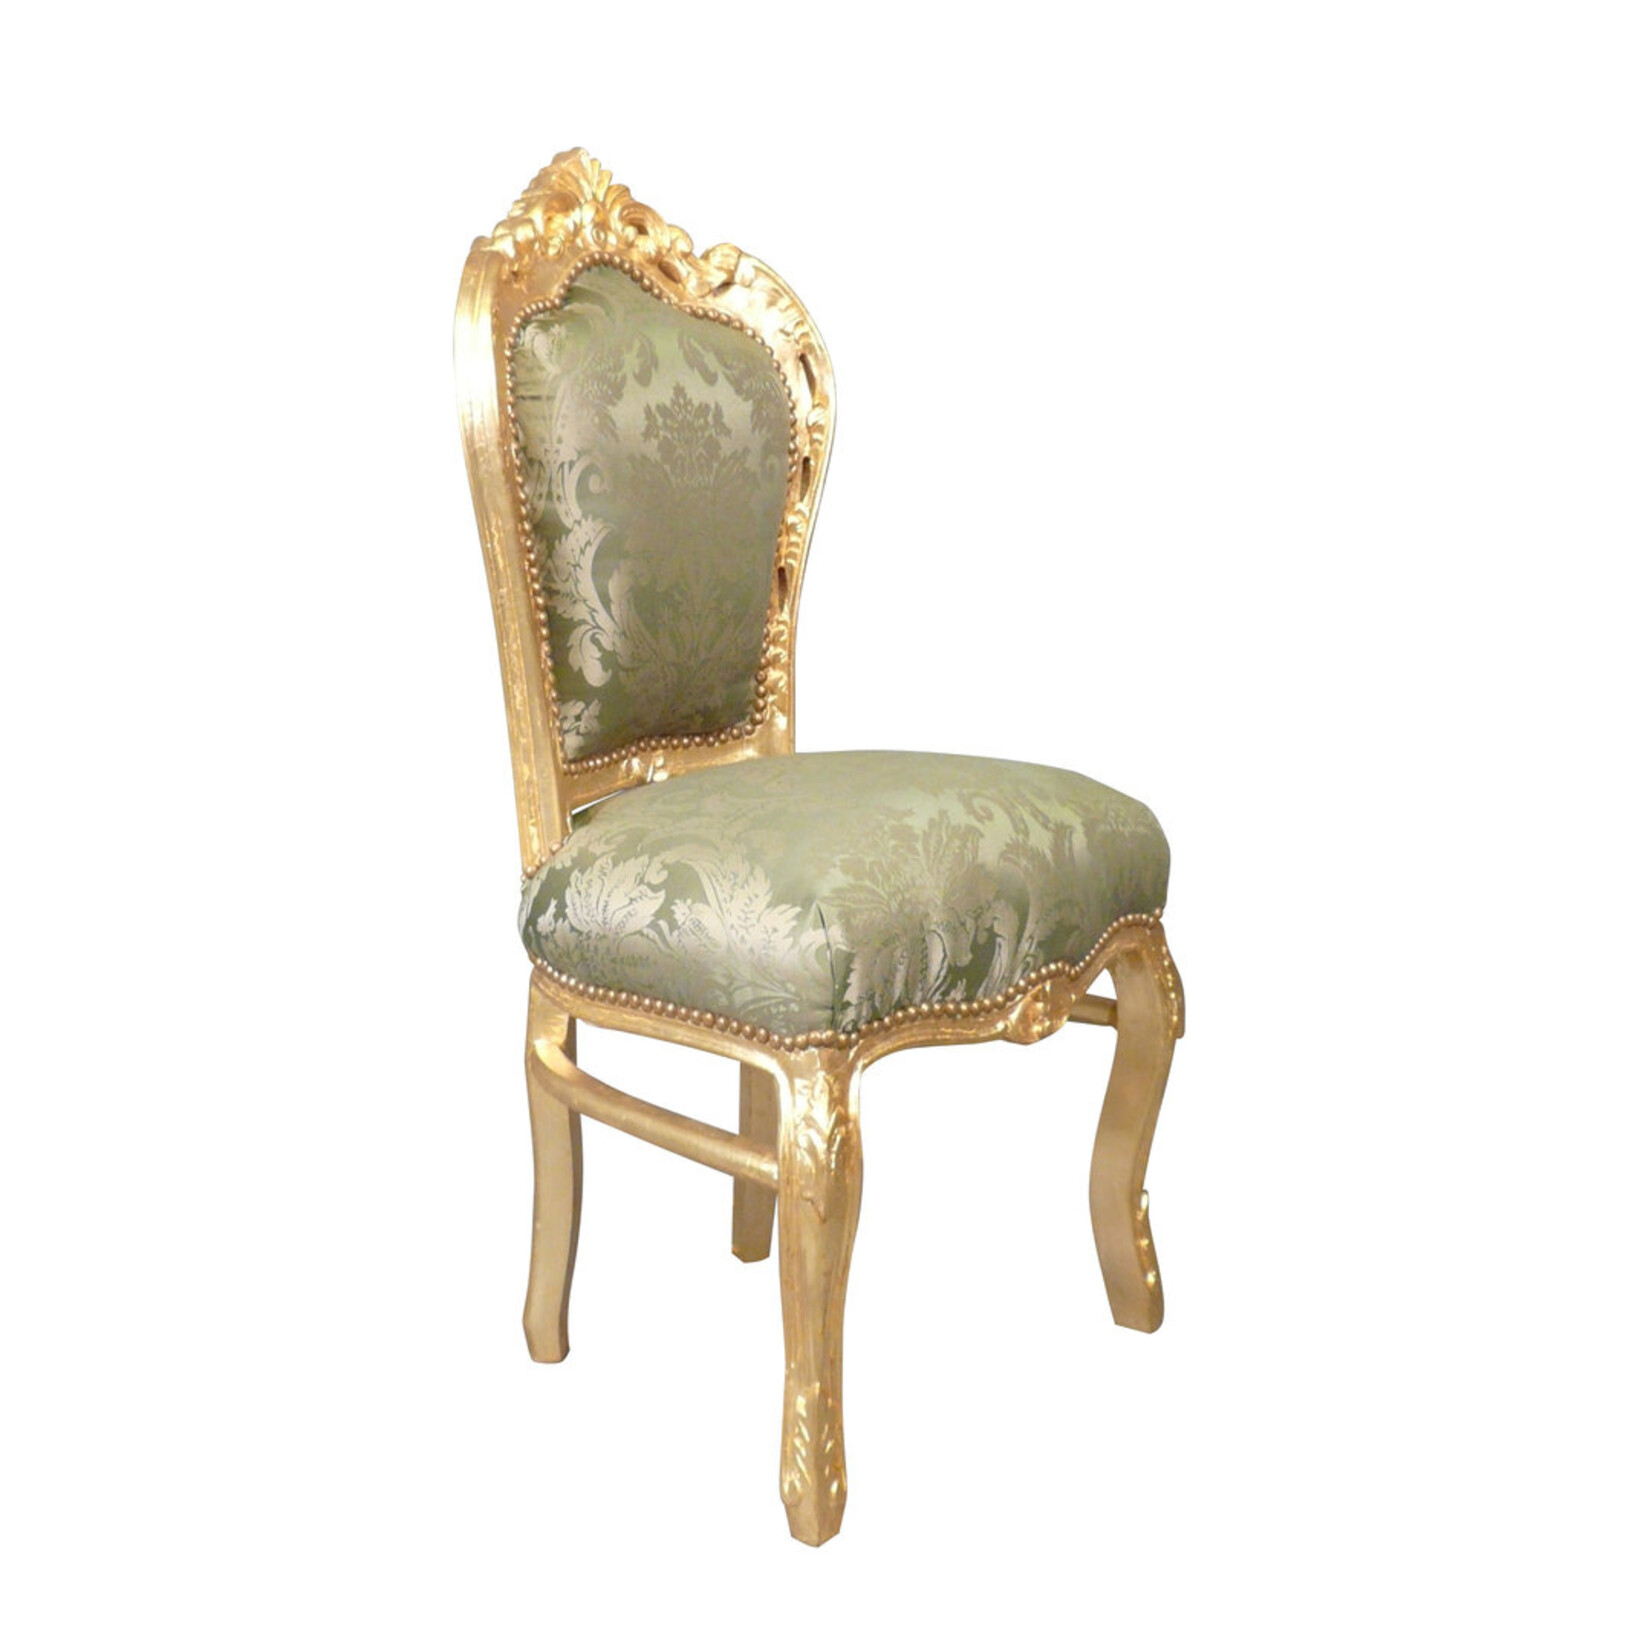 LC Baroque dining room chair gold green